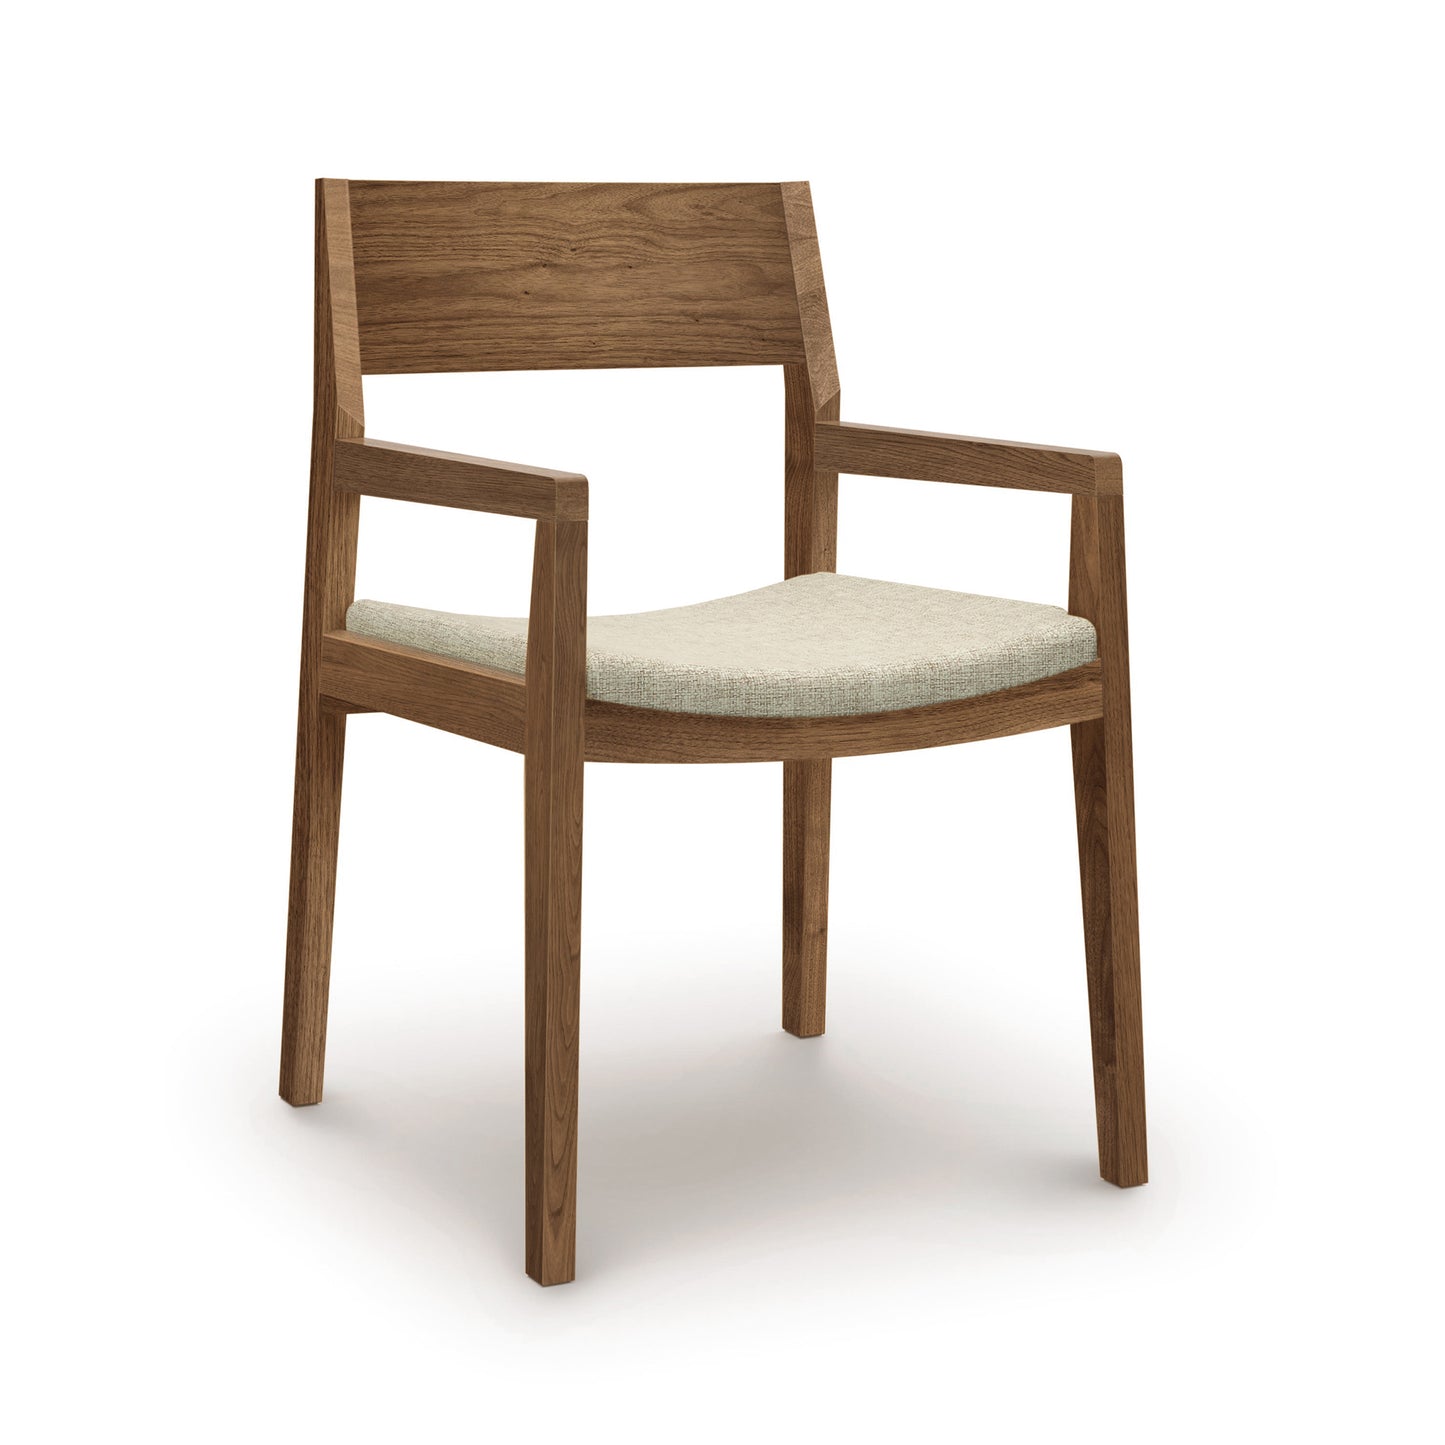 Iso Walnut Arm Chair - Floor Model by Copeland Furniture | Vermont ...